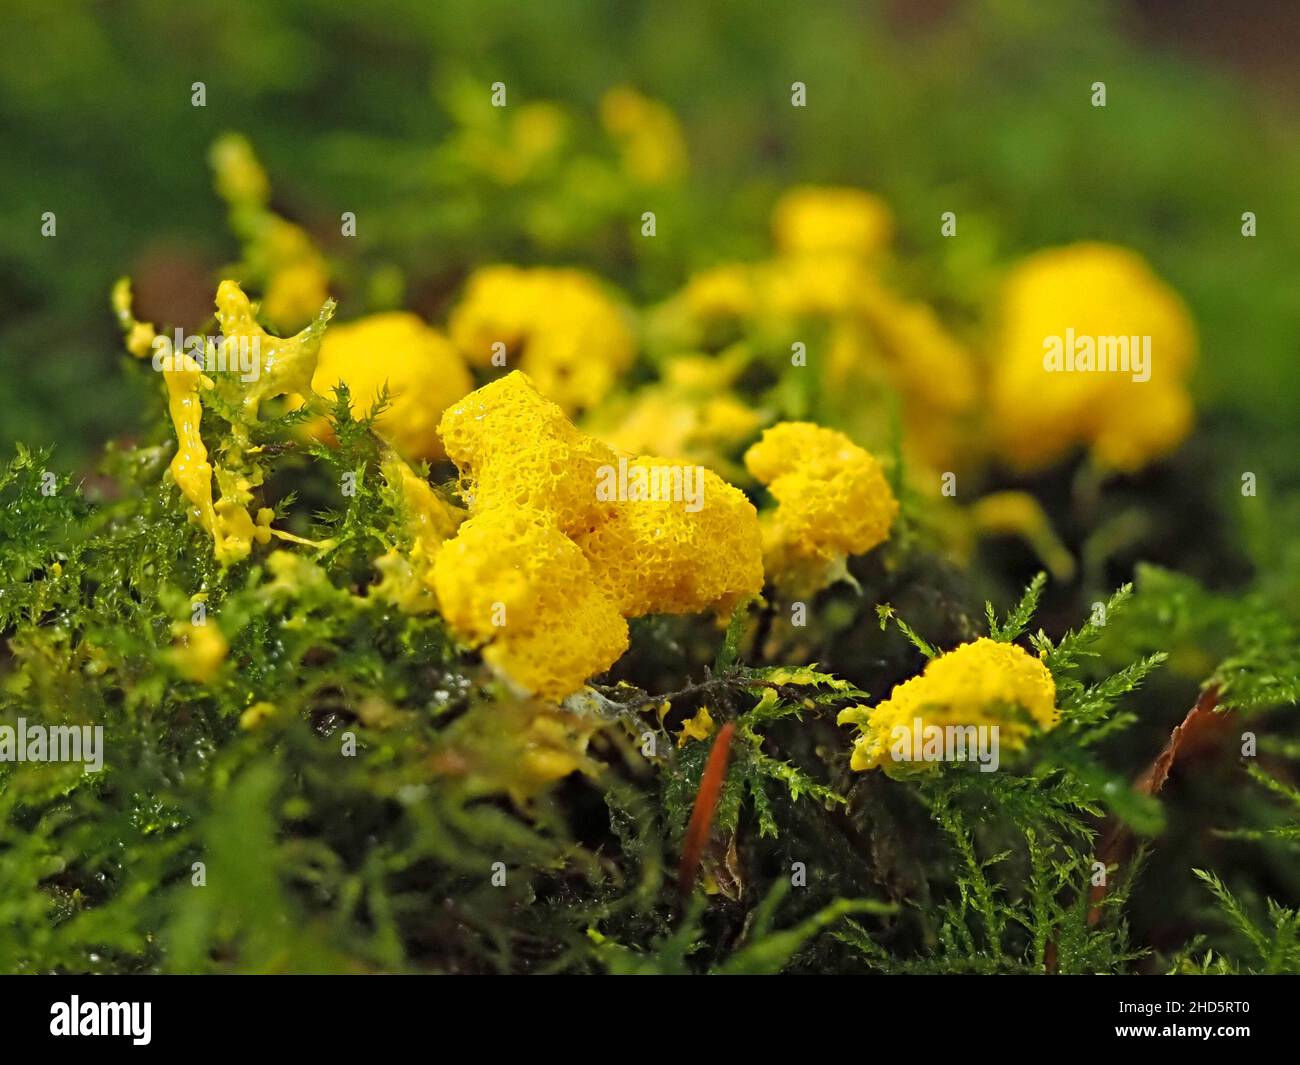 Yellow Slime Mould Fungus (Fuligo septica) aka Dog Vomit Slime Mould or scrambled Egg Slime growing on moss on forest floor in Perthshire,Scotland,UK Stock Photo